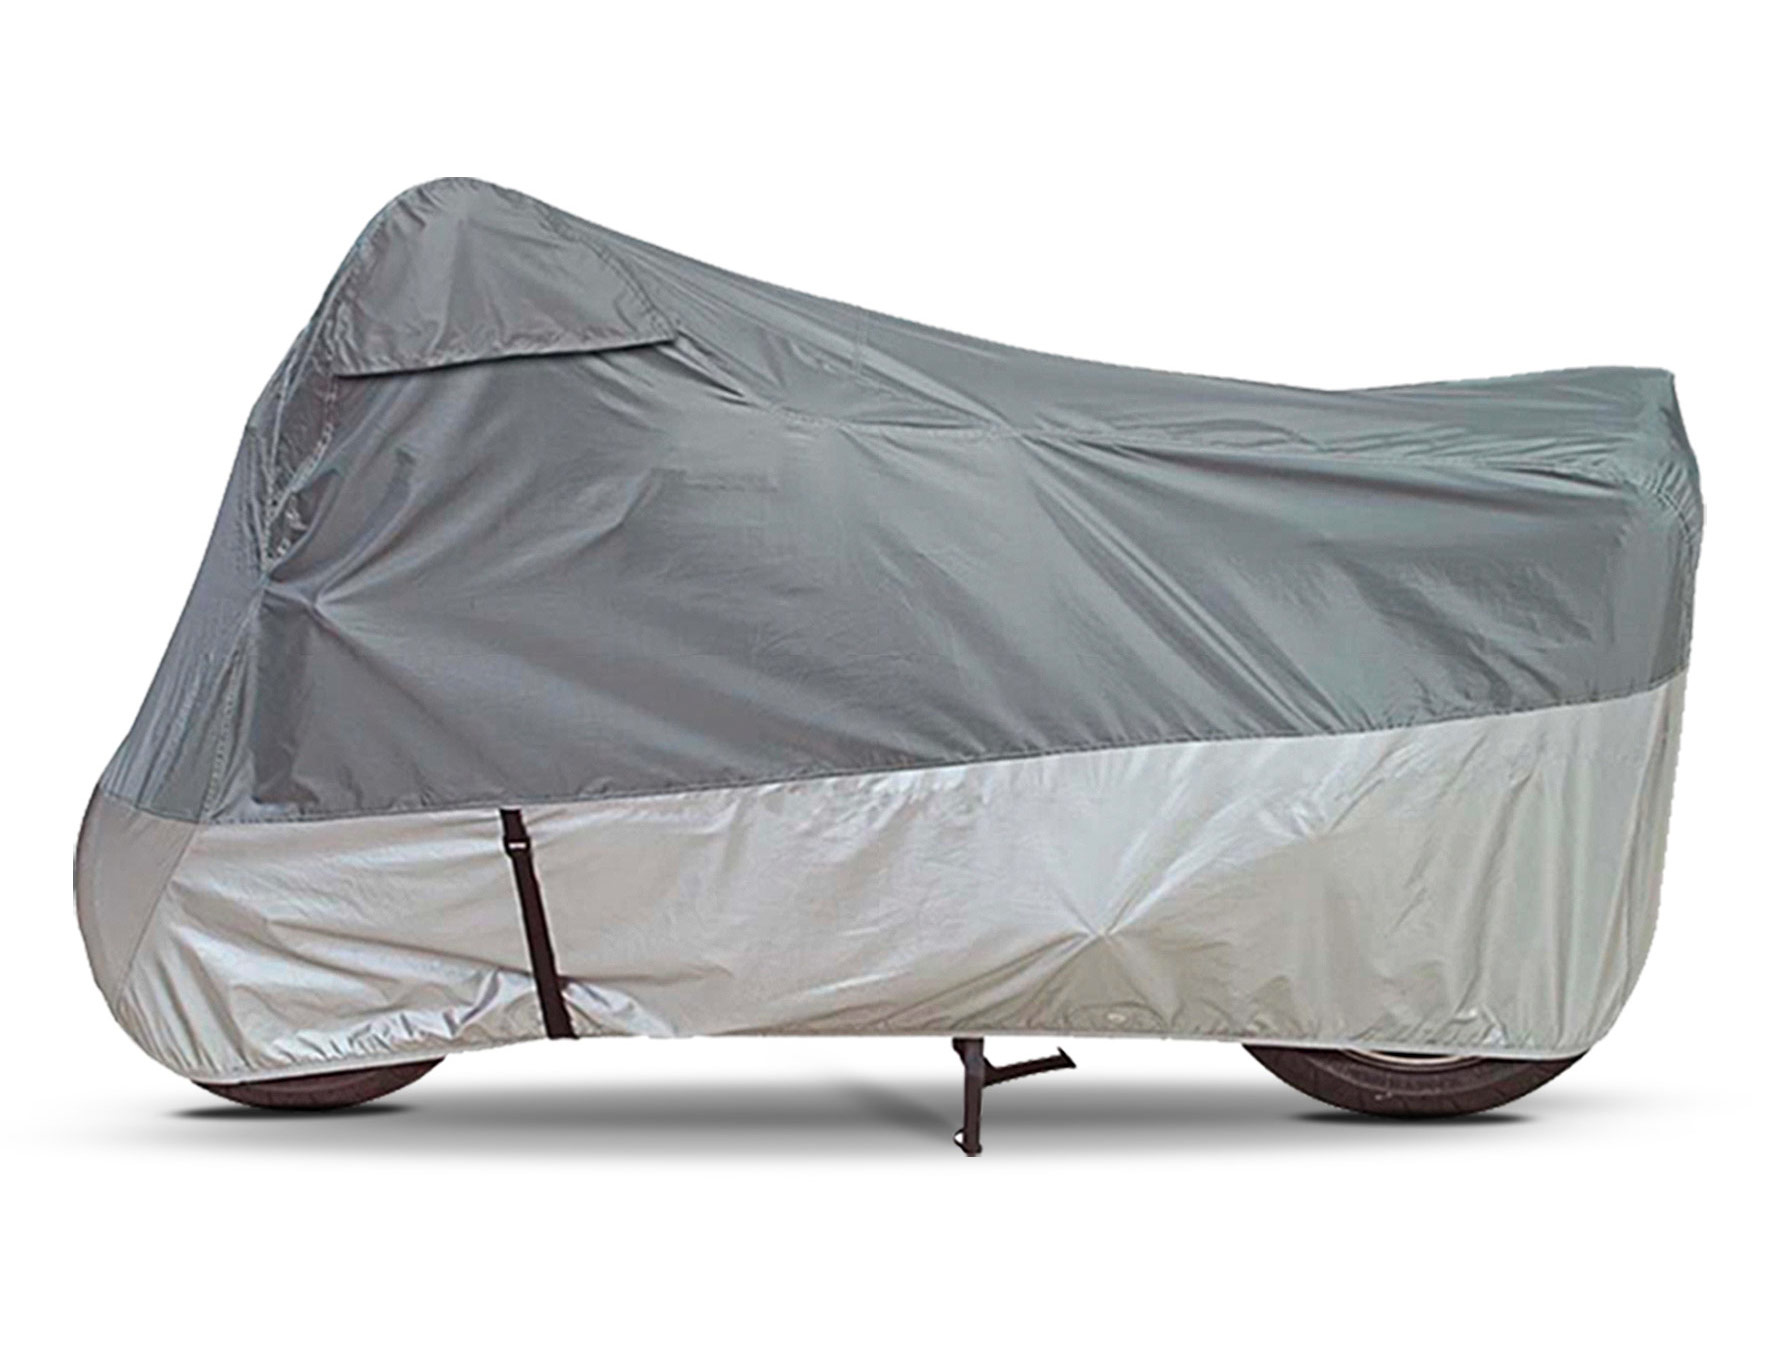 DOWCO Ultralite Travel Motorcycle Cover Lightweight M 